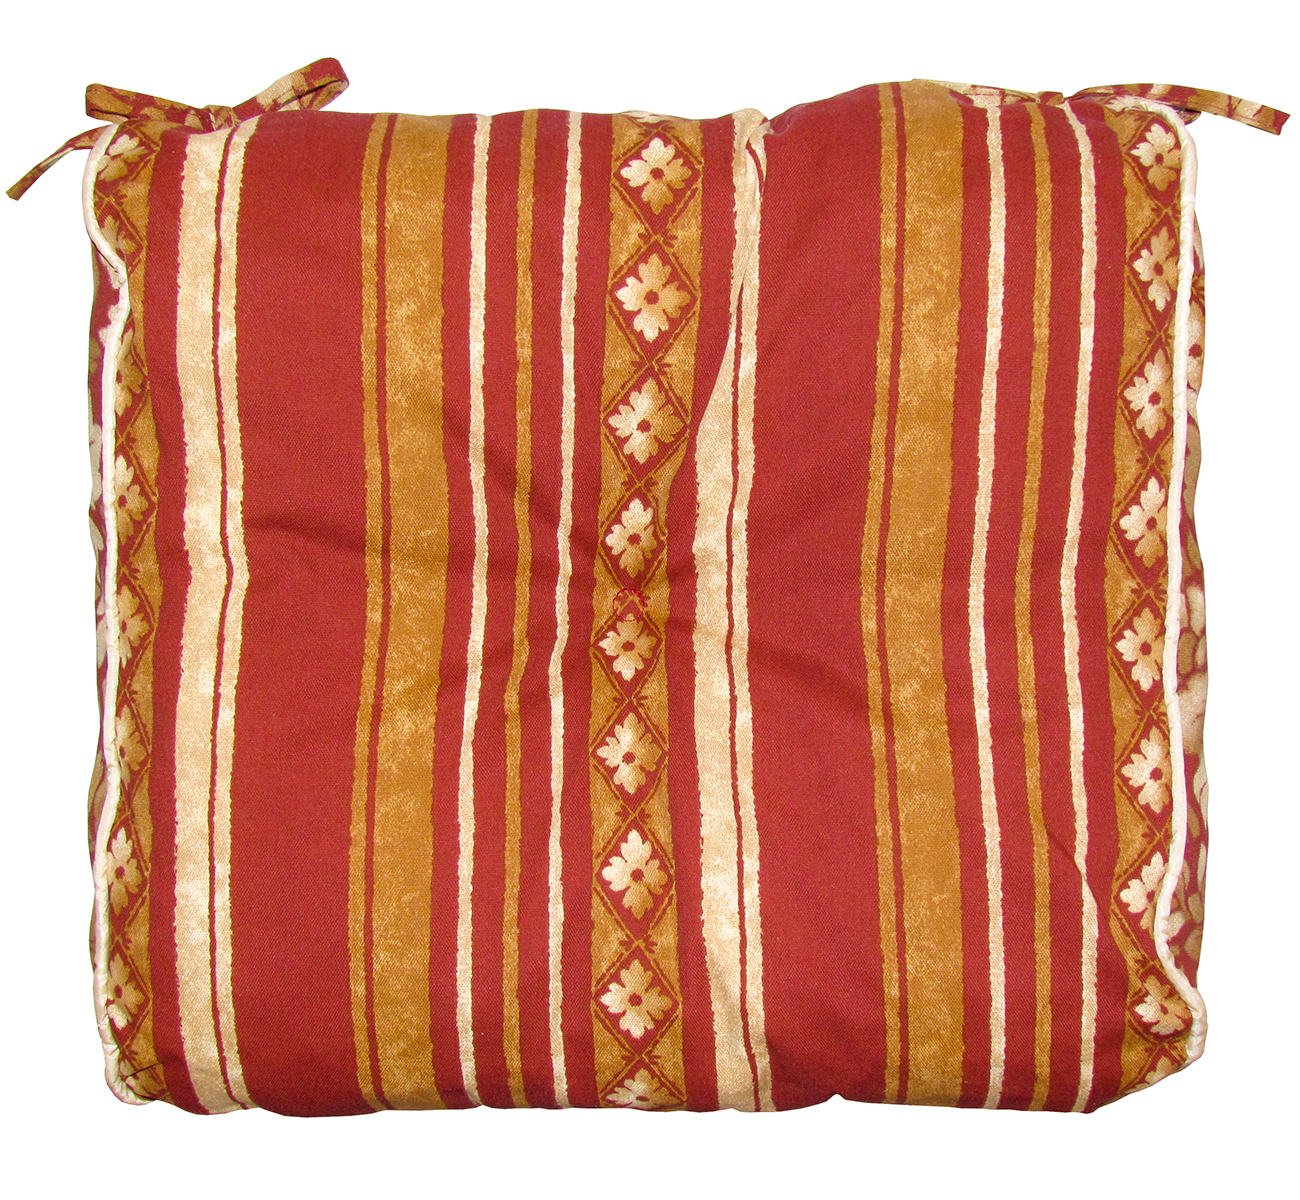 Image of Bozanto Brown Striped Reversible Outdoor Seat Cushion